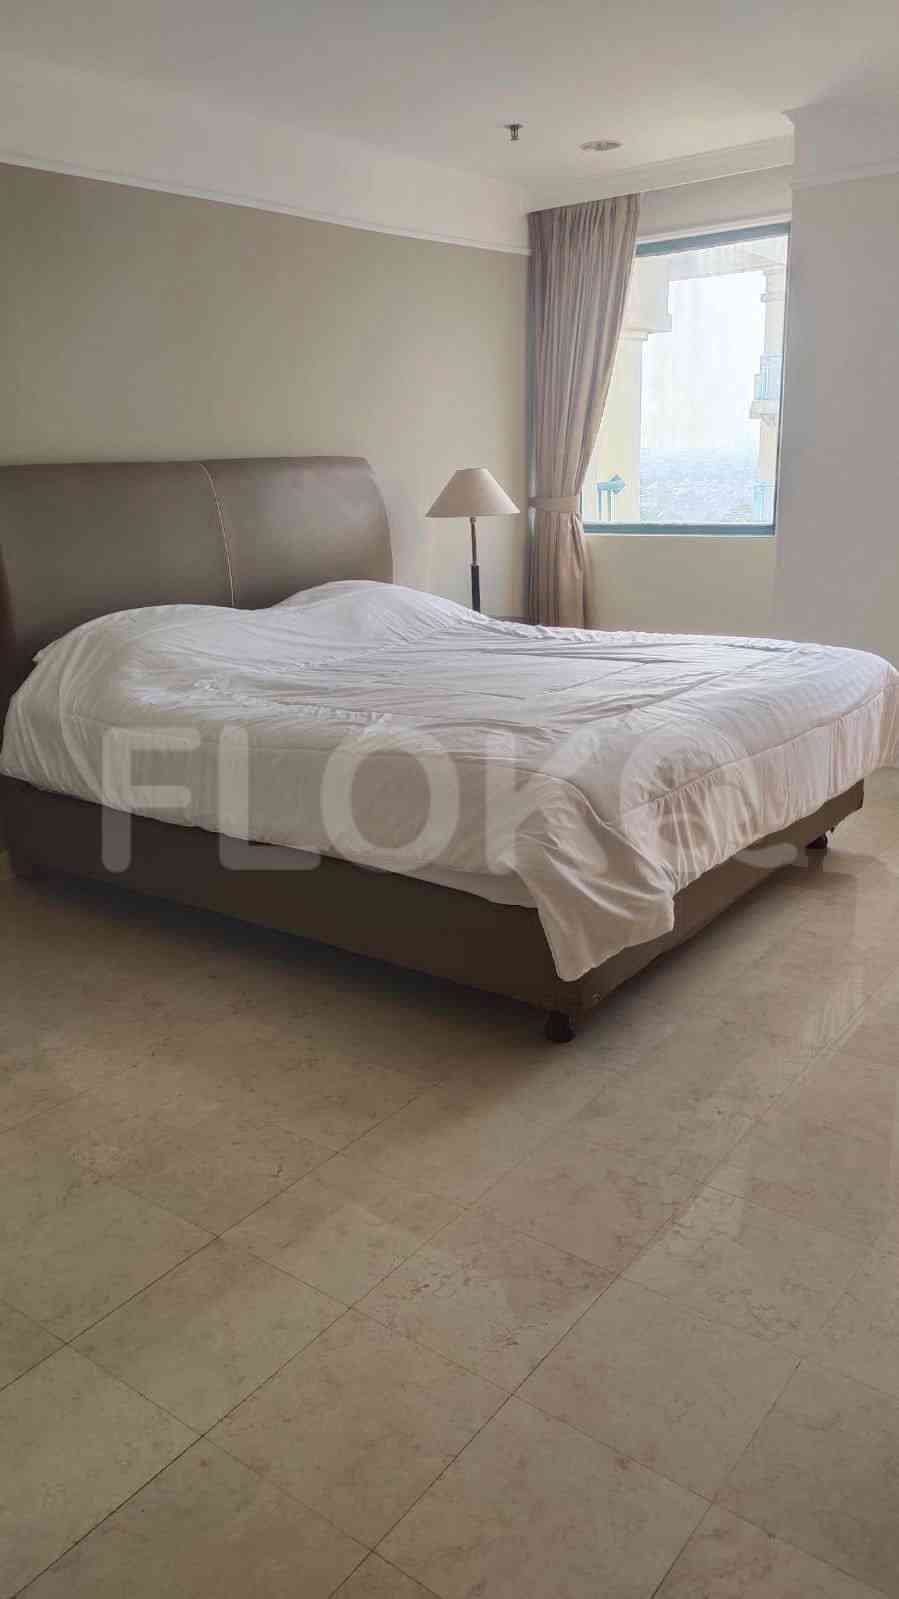 3 Bedroom on 12th Floor for Rent in Golfhill Terrace Apartment - fpofa3 1